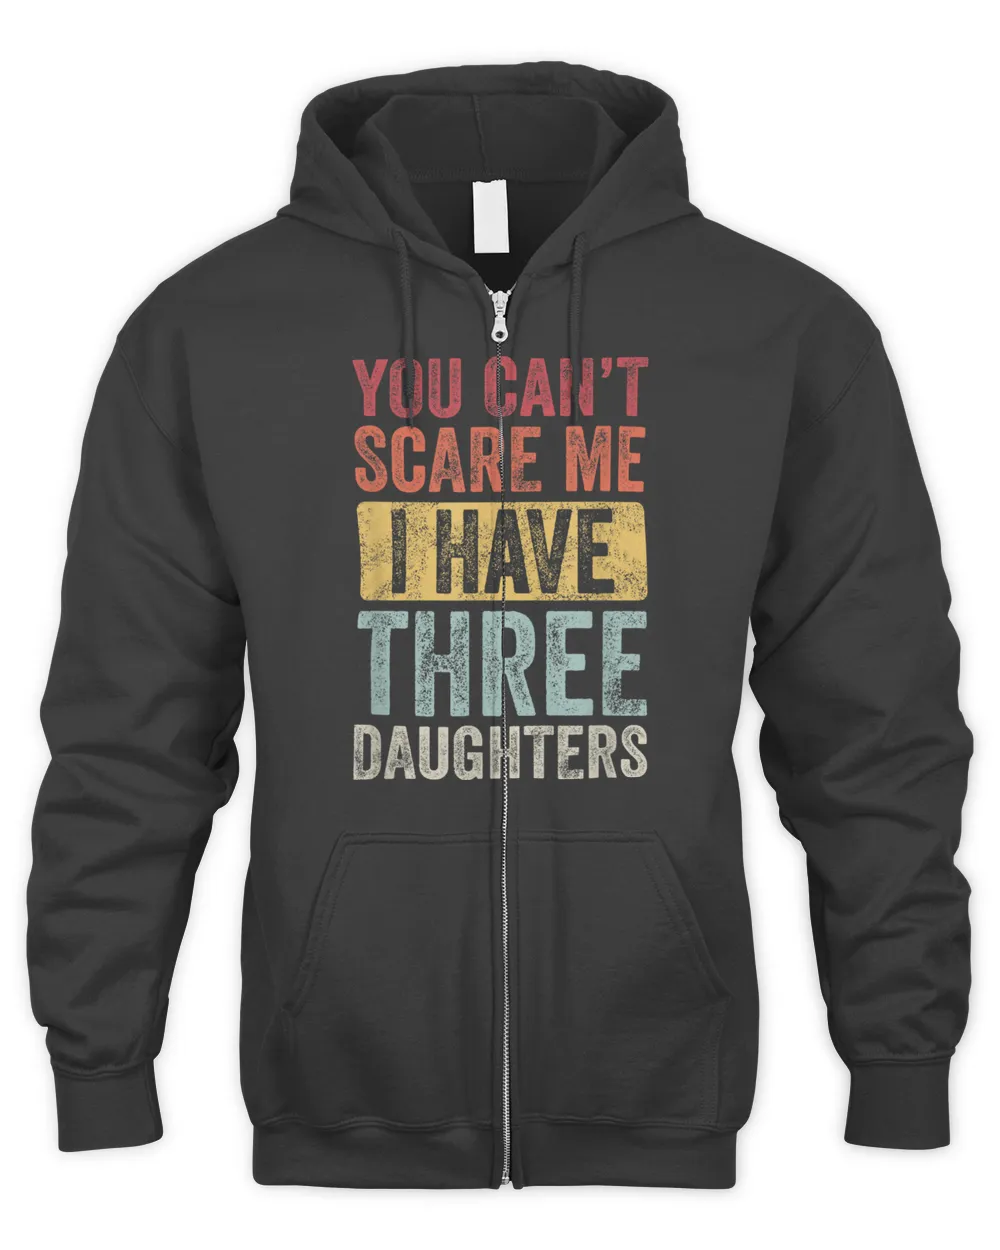 You Can't Scare Me I Have Three Daughters | Retro Funny Dad T-Shirt